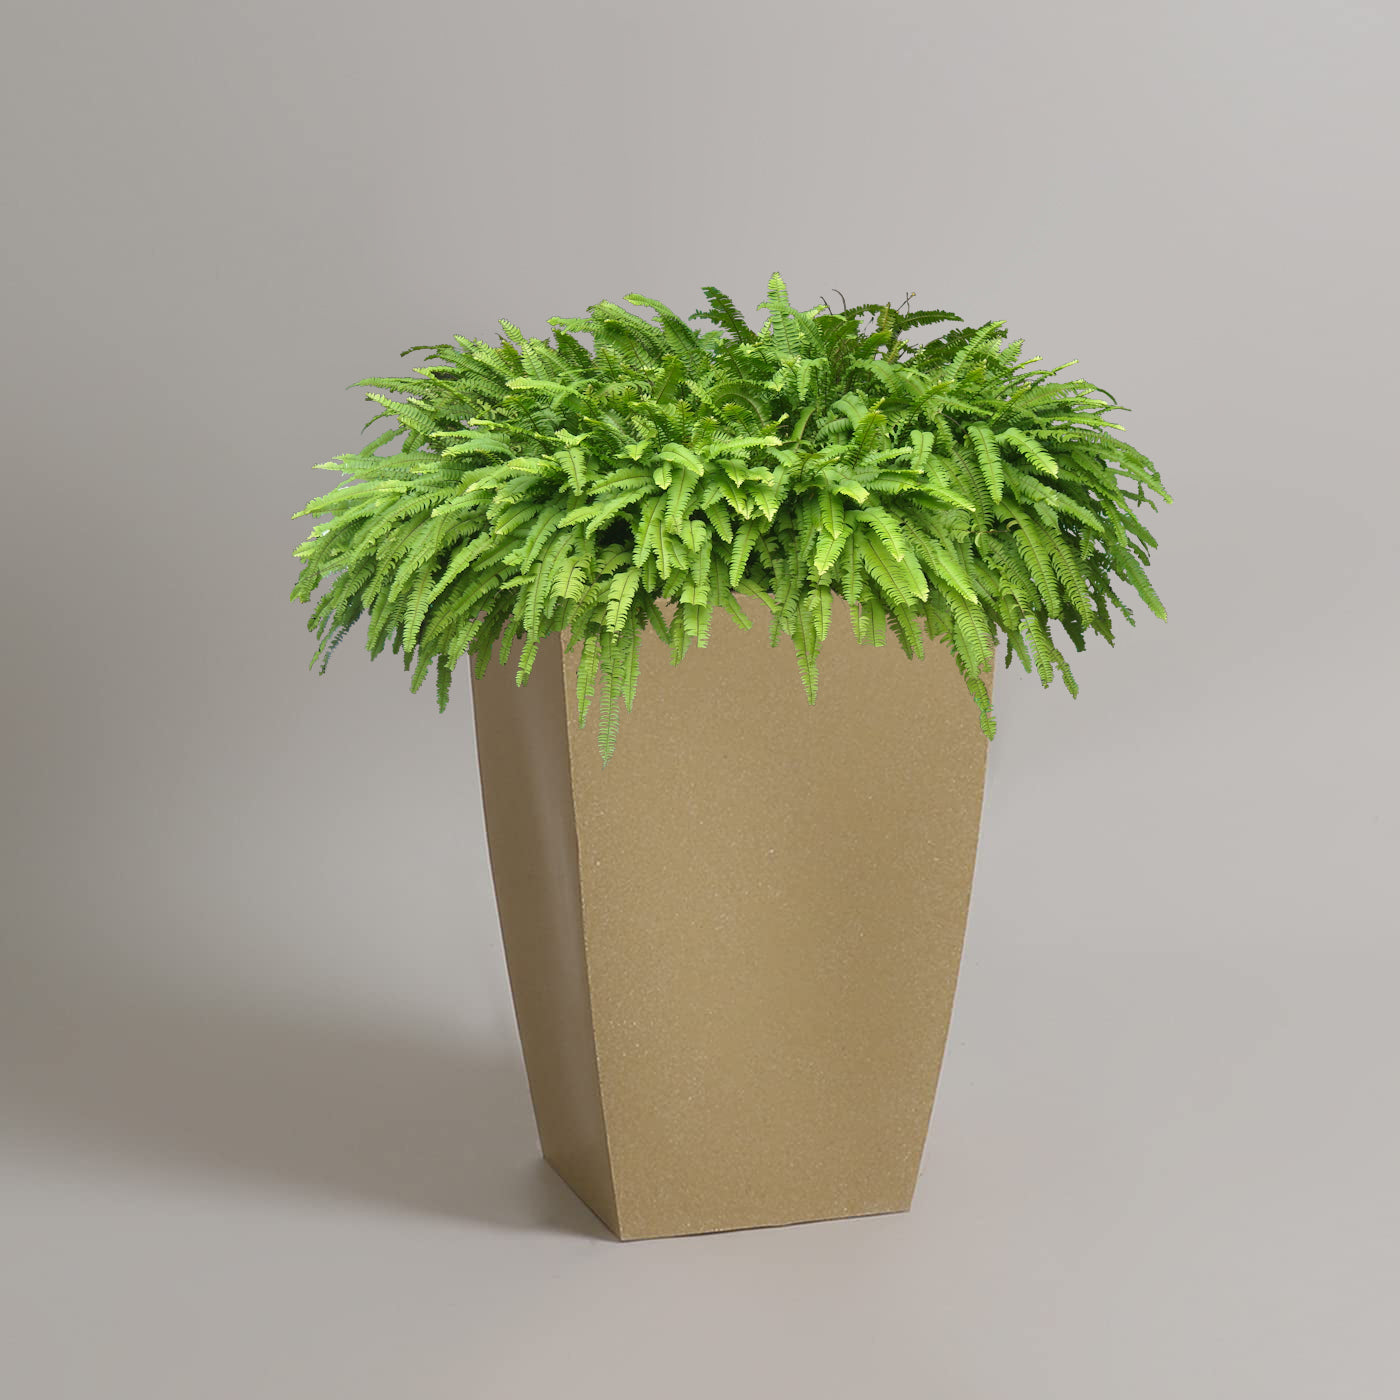 AGC Design Fox B TK Square Tall Planter Suitable for Indoor and Outdoor